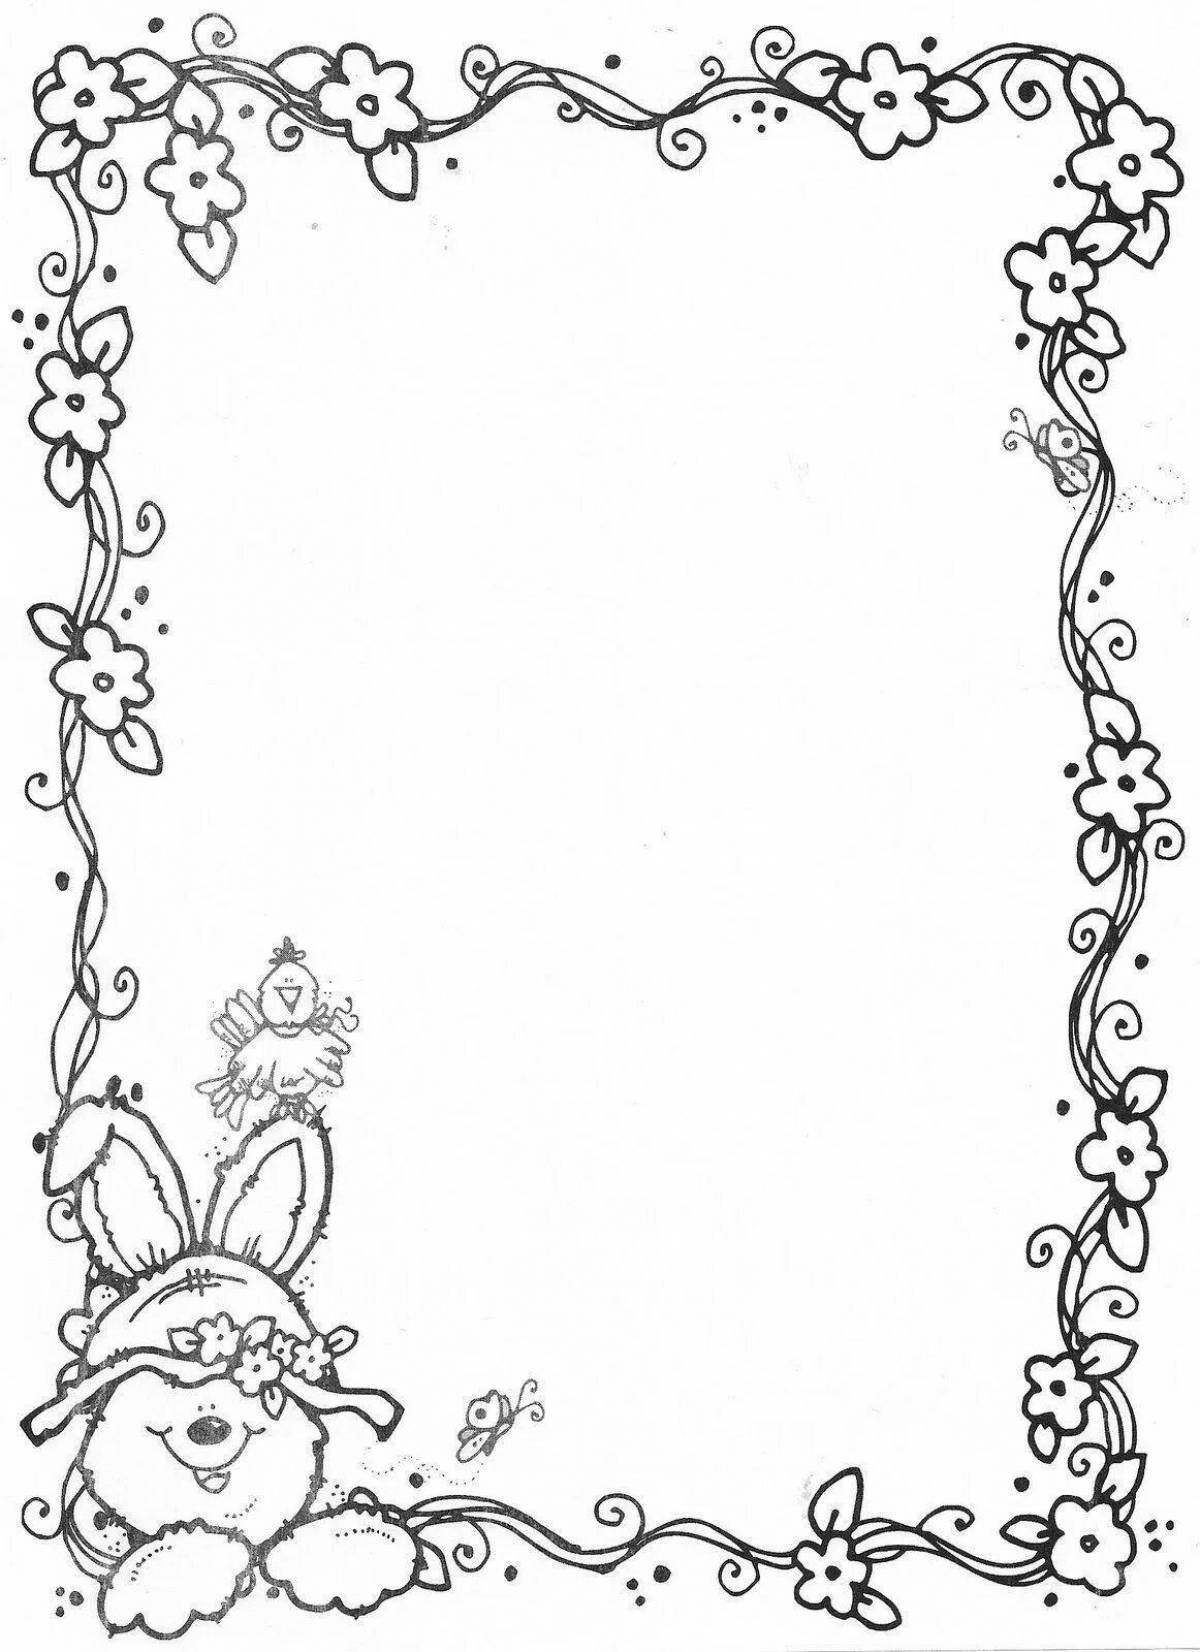 Cute coloring page title